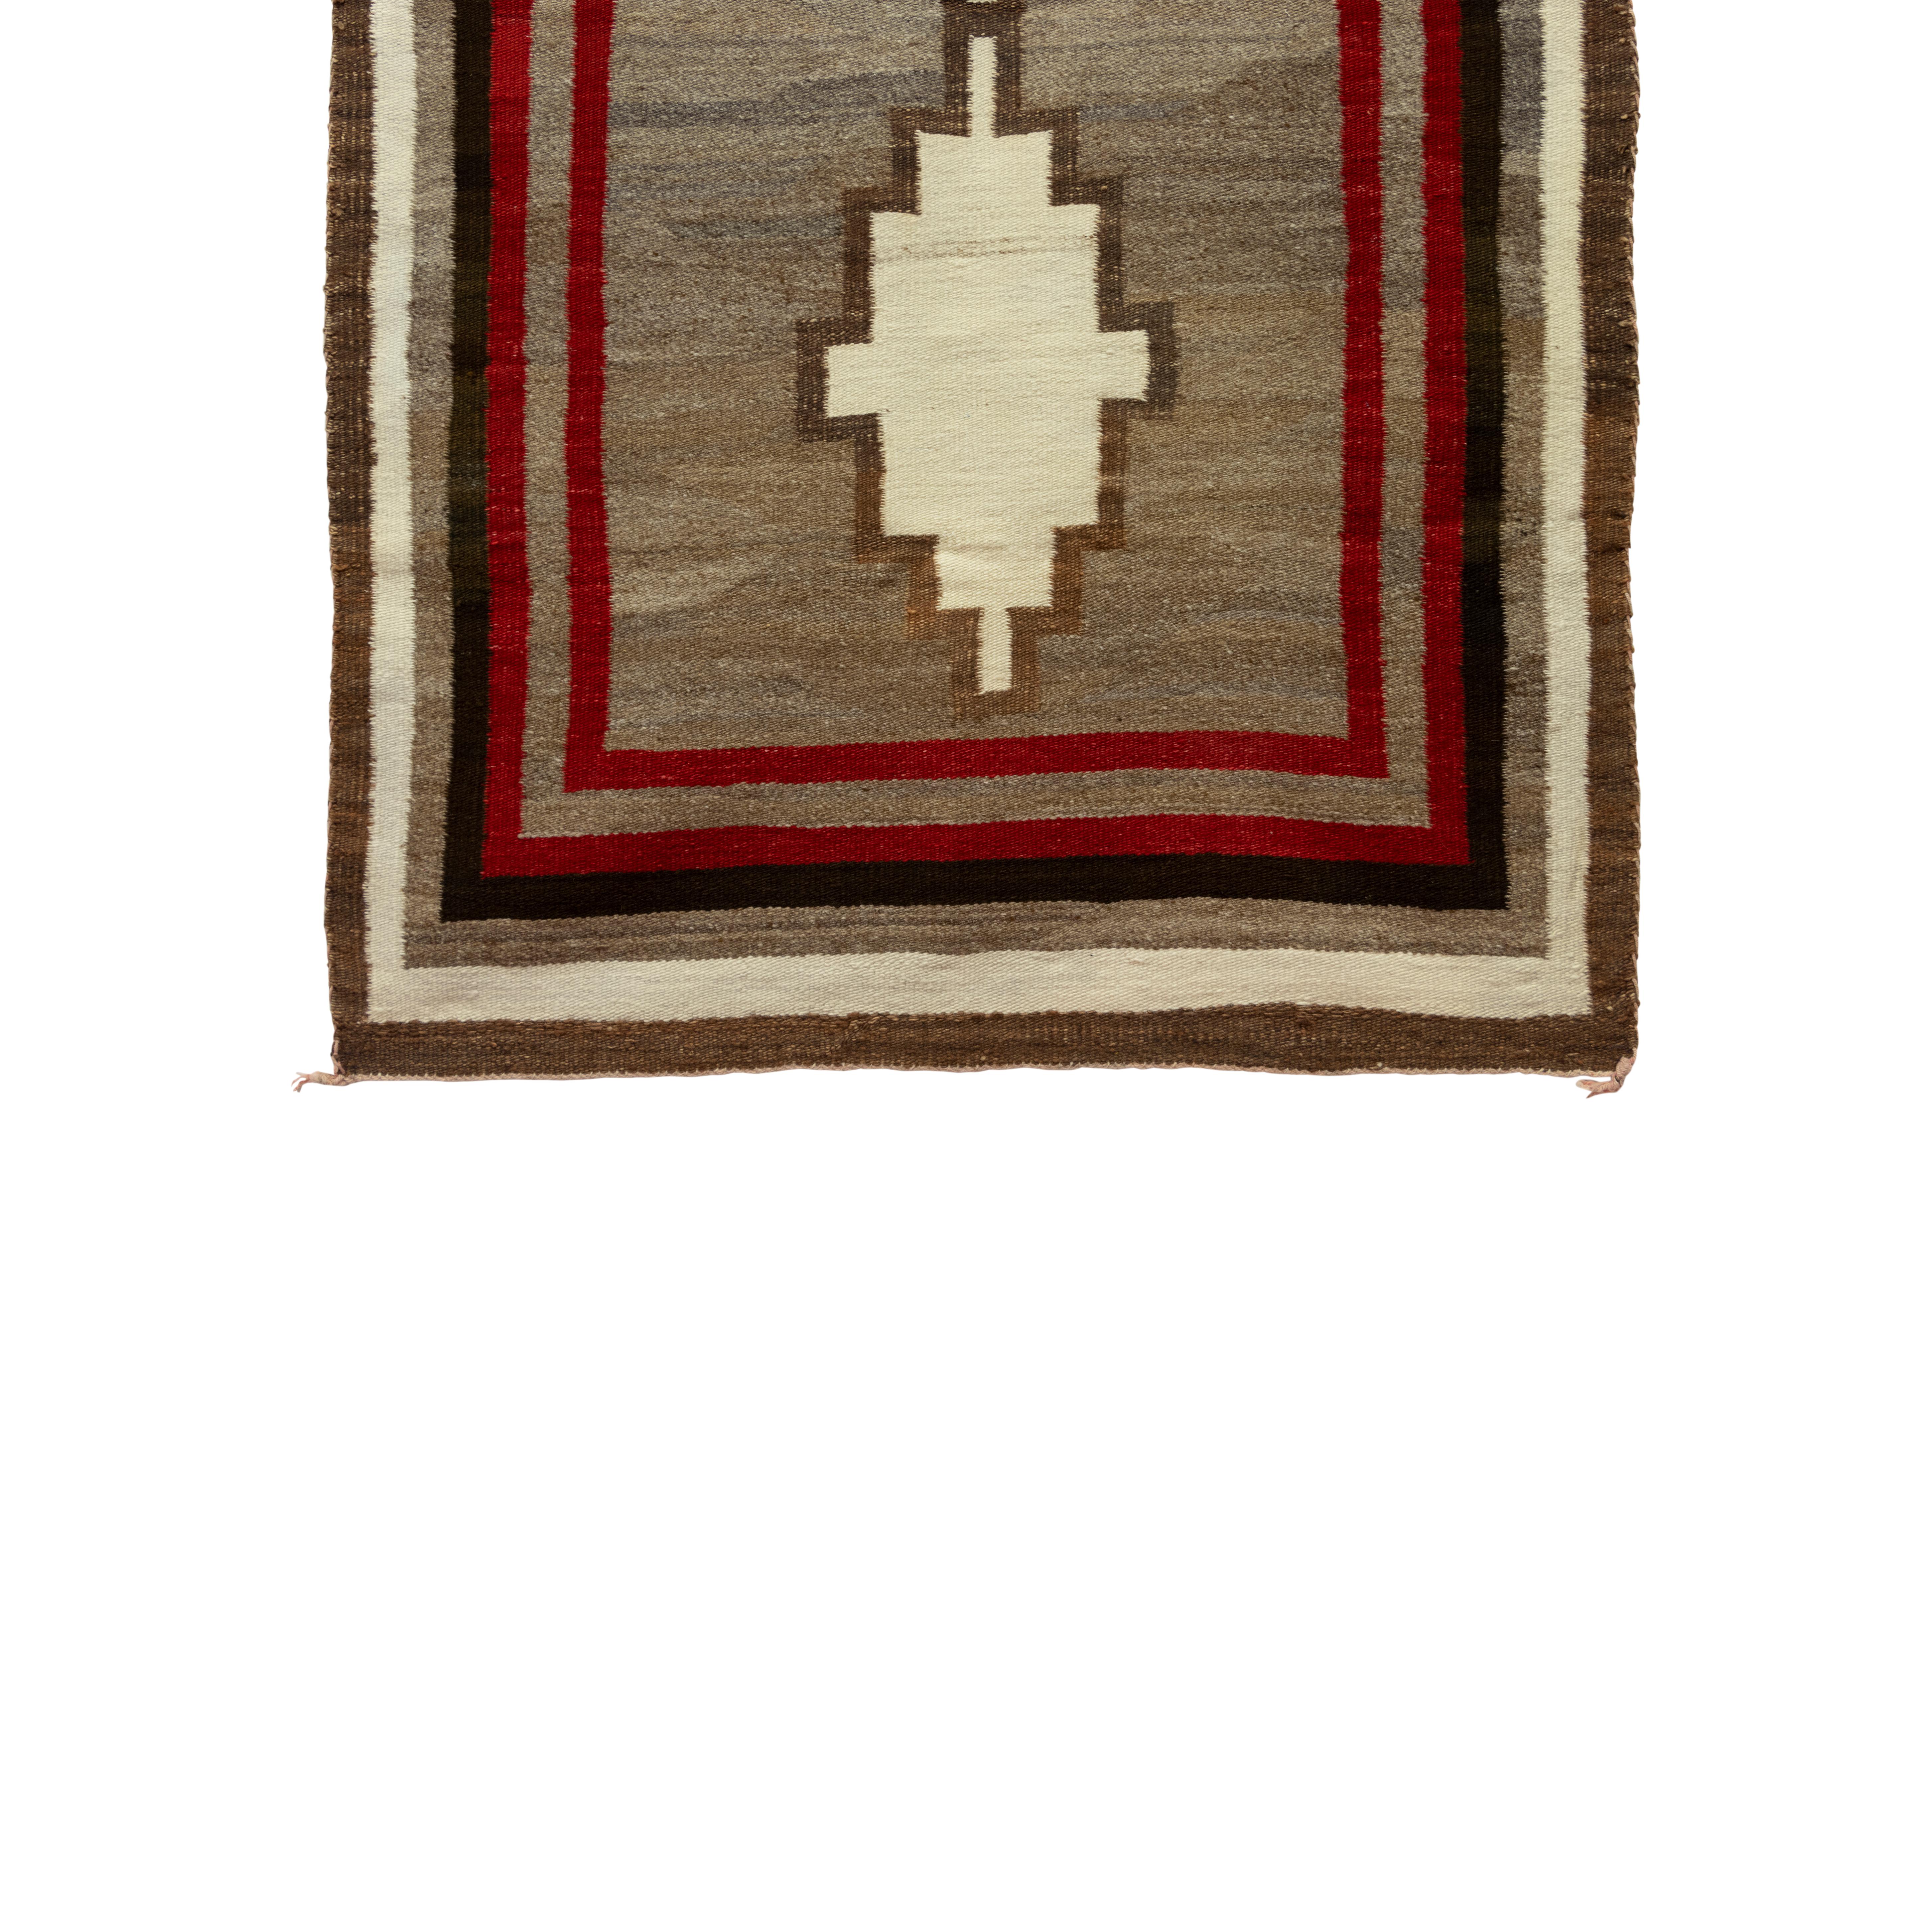 Navajo crystal with seven borders. Nice variegations in the natural brown and dyed red. Measures: 3'4